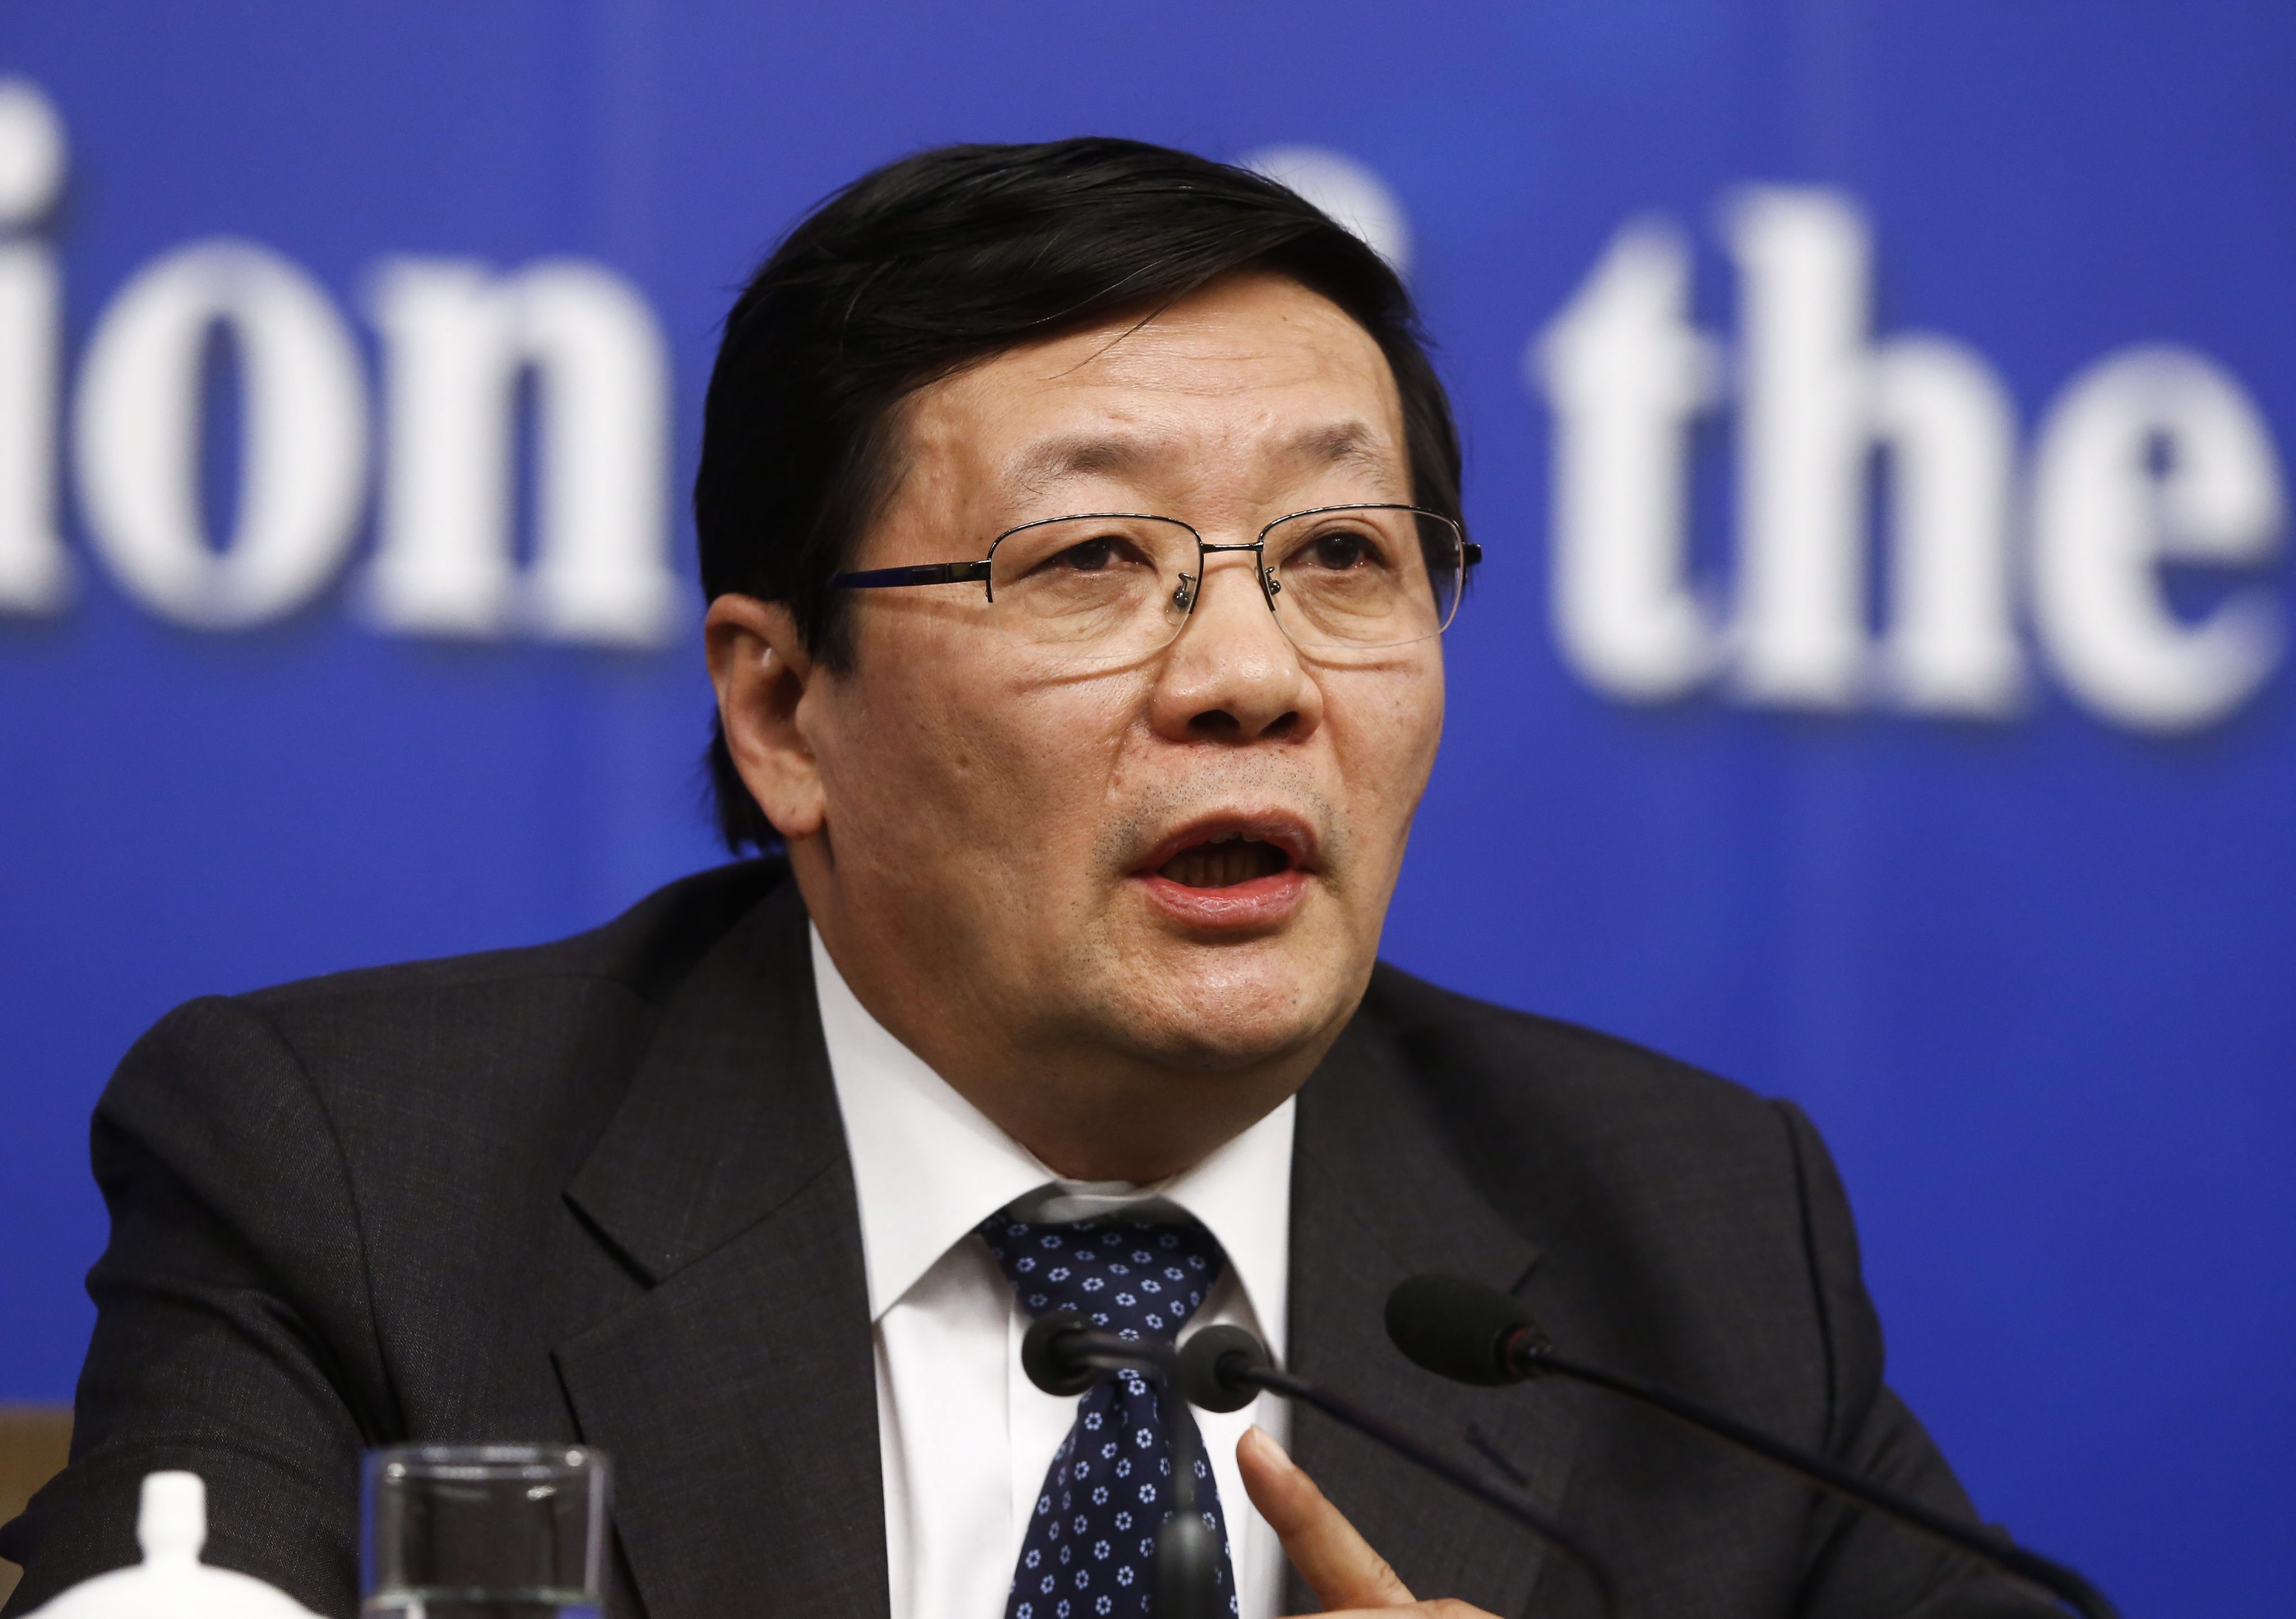 Finance Minister Lou Jiwei said countries including the OECD developed nations should trust Beijing's capability to reform and sustain its economy. Photo: EPA